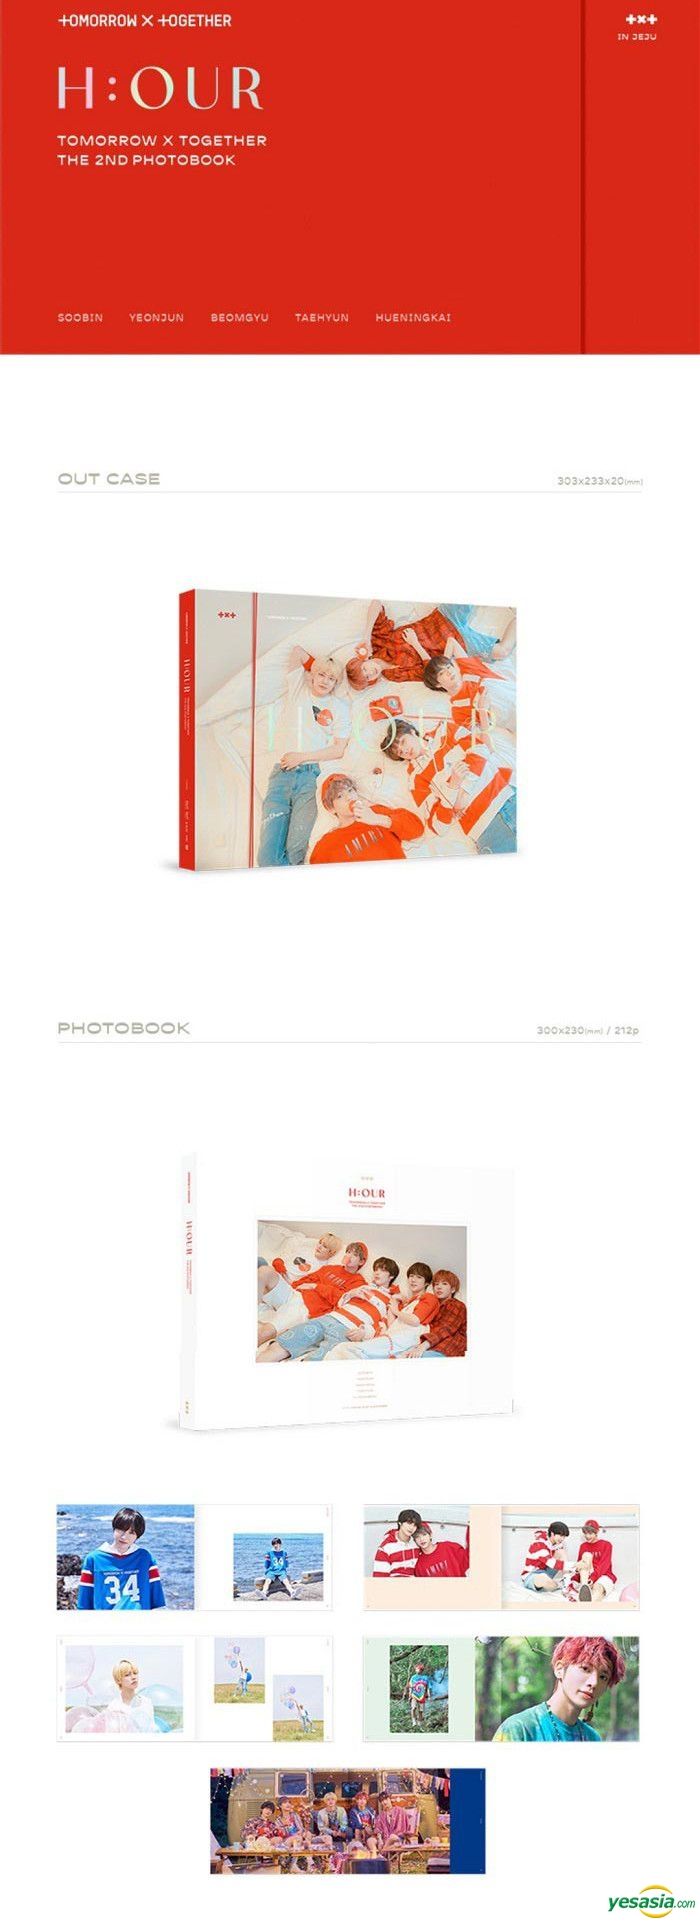 YESASIA: TXT - The 2nd Photobook [H:OUR] (Photobook + Making